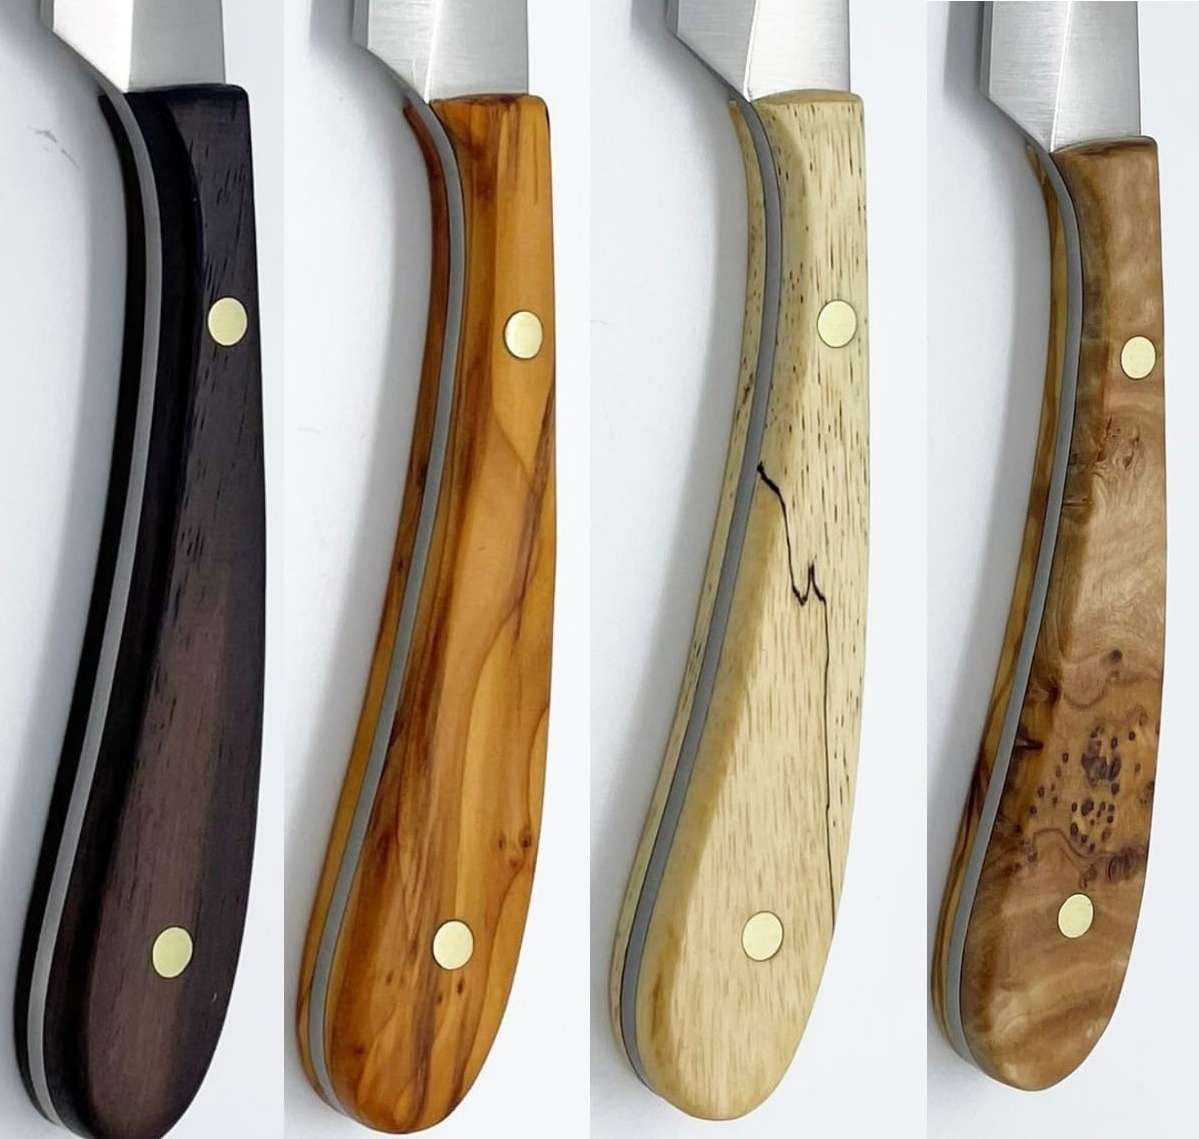 One of each Colour handle